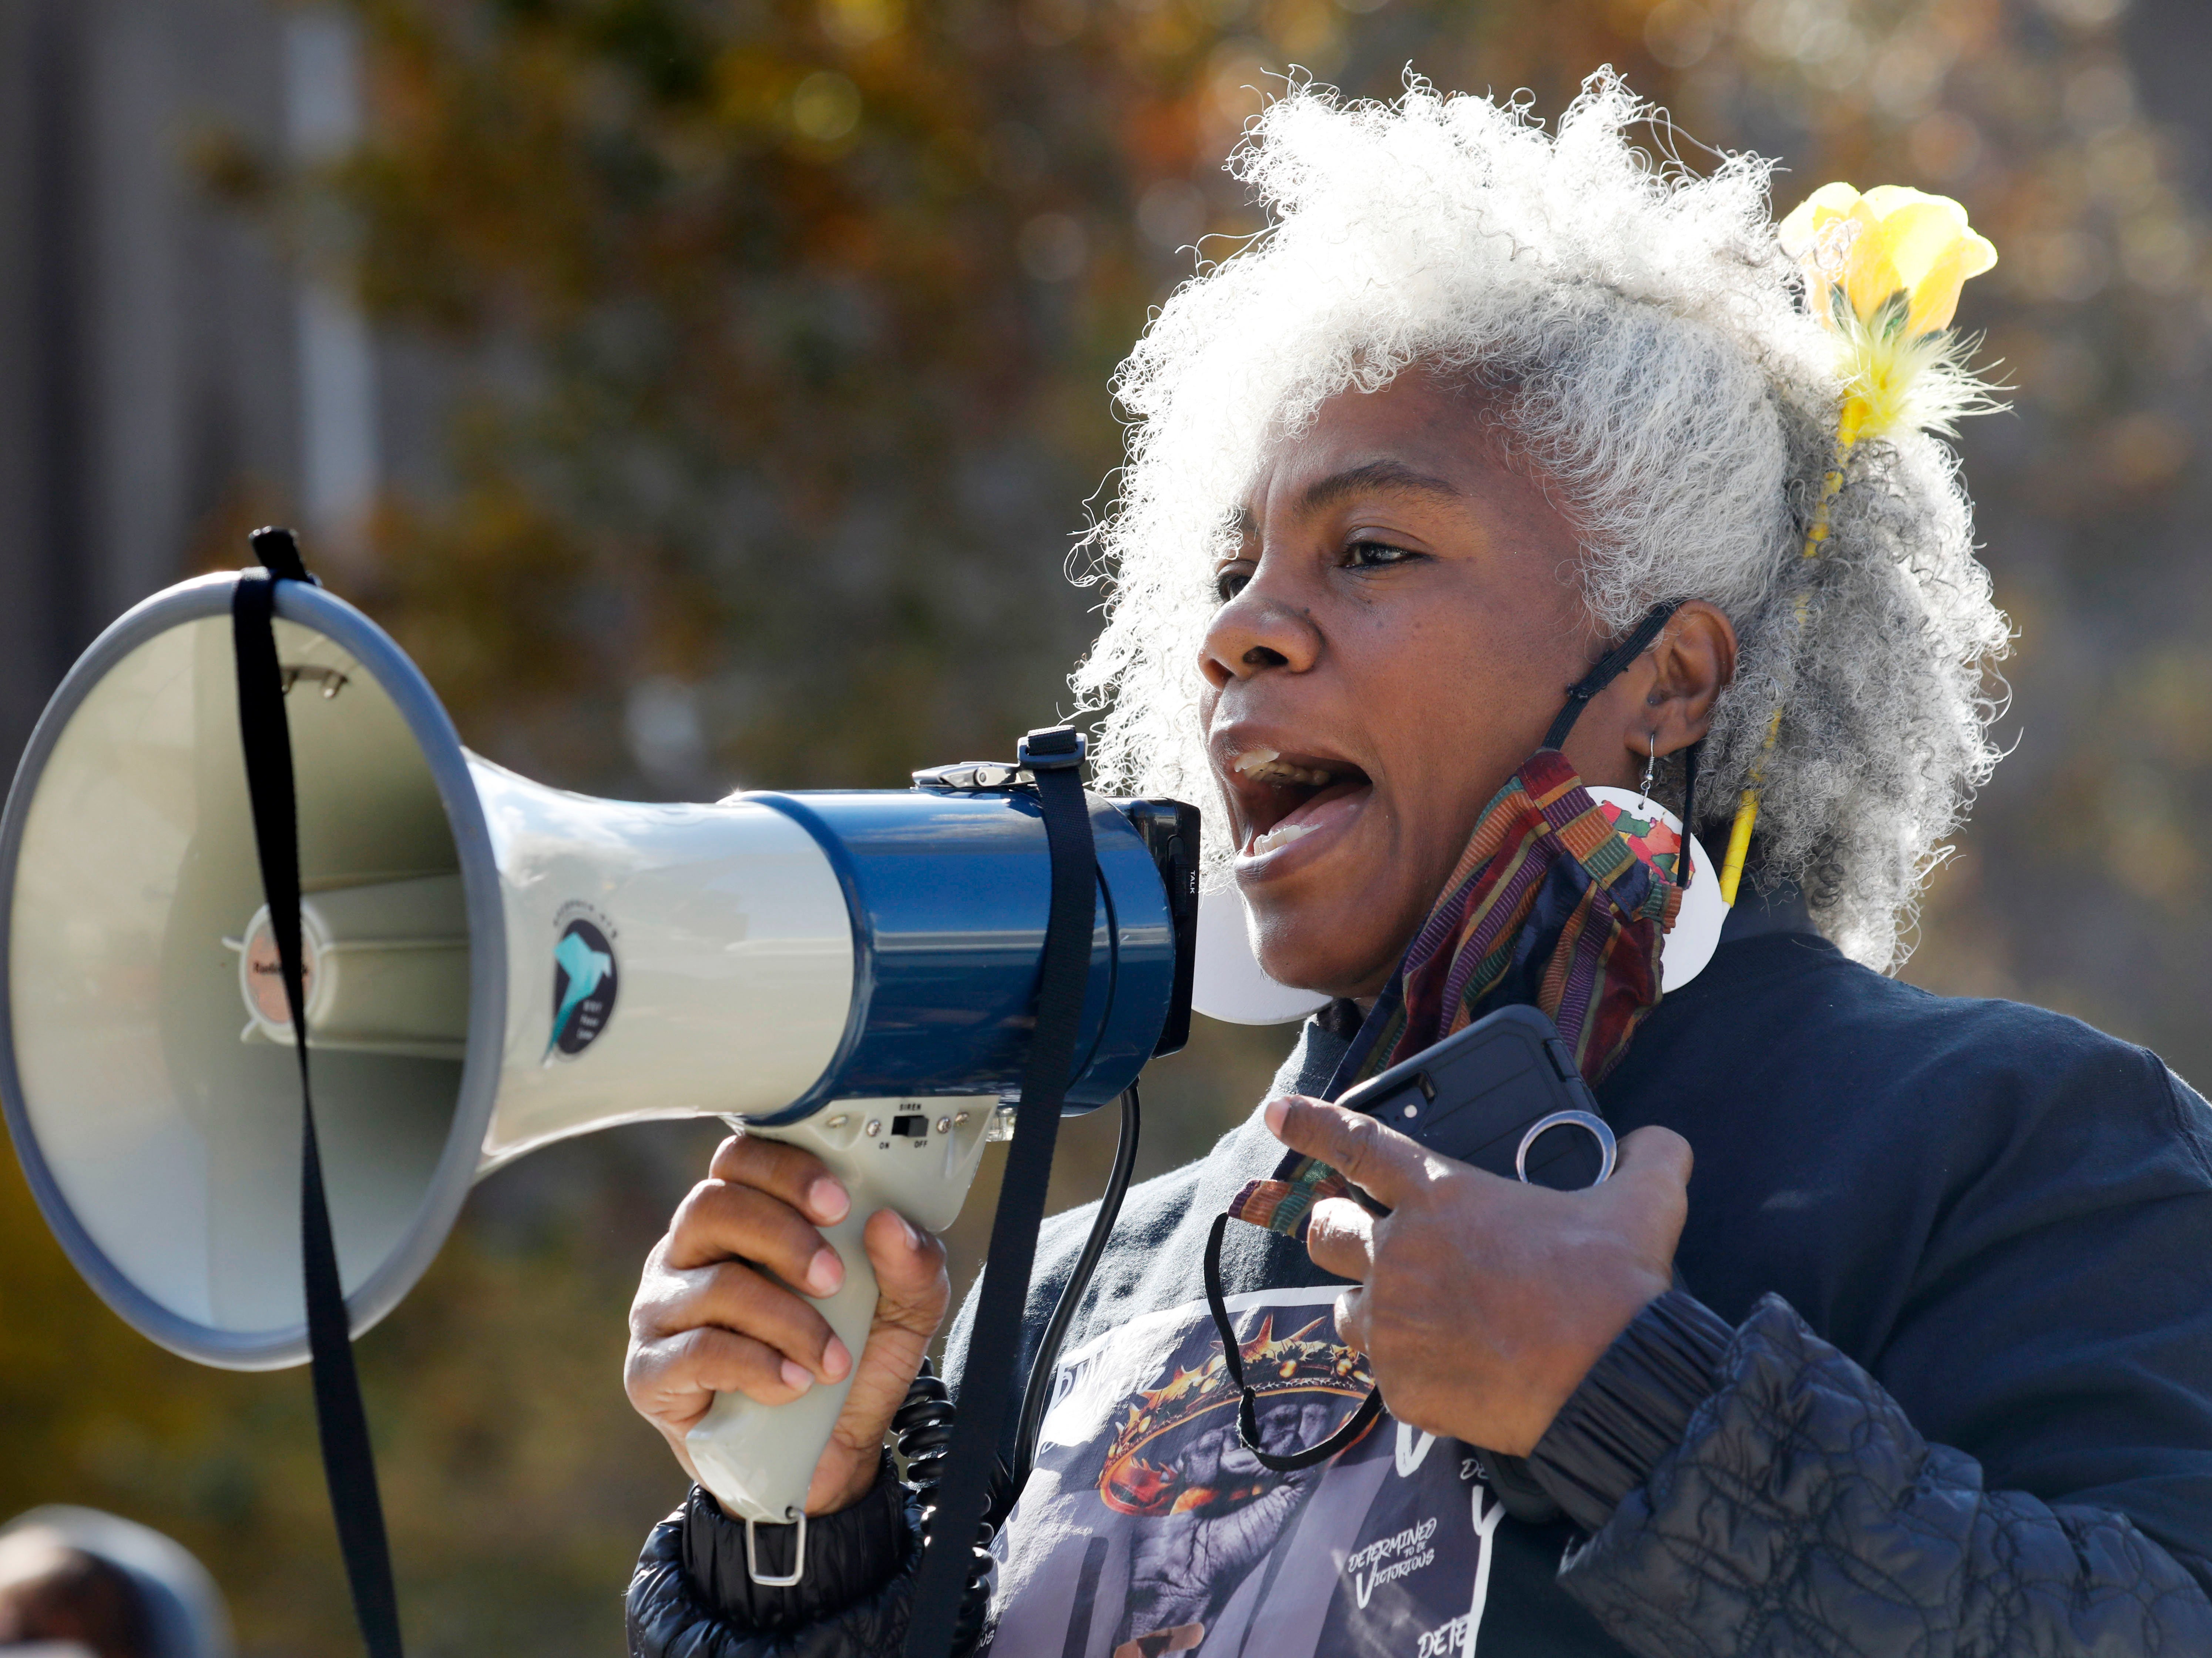 Cariol Horne speaks during the WNY Women’s March on Saturday, Oct. 17, 2020 in Buffalo, N.Y.